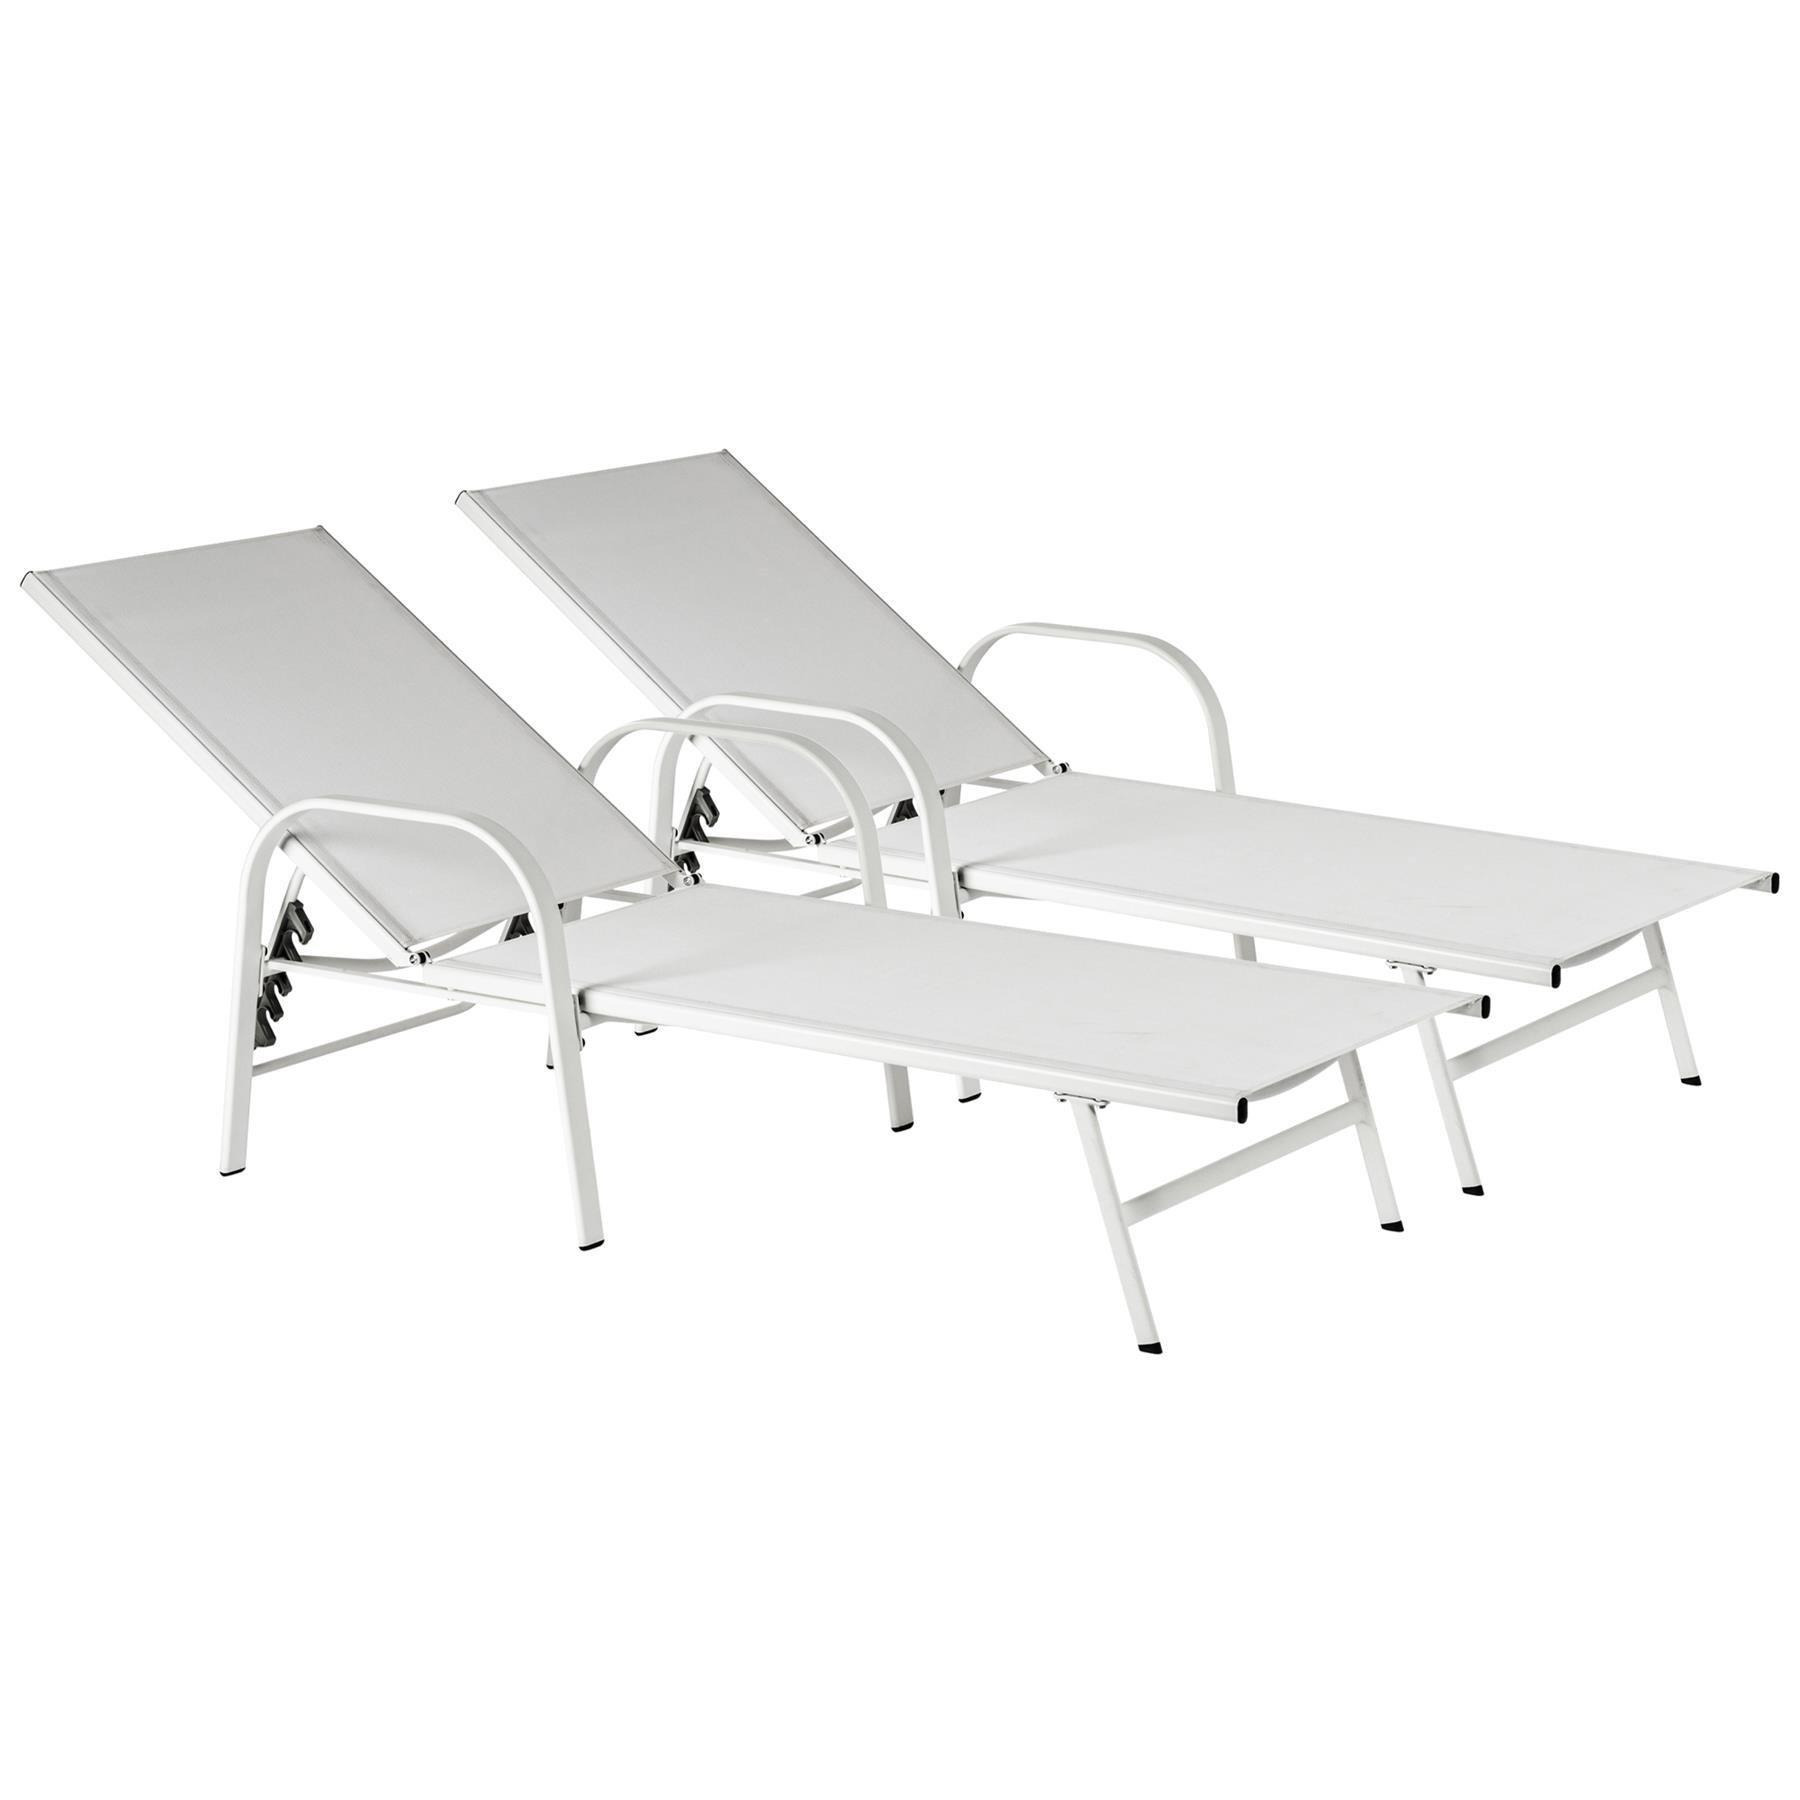 Sussex Garden Sun Lounger Bed Pack of 2 - image 1